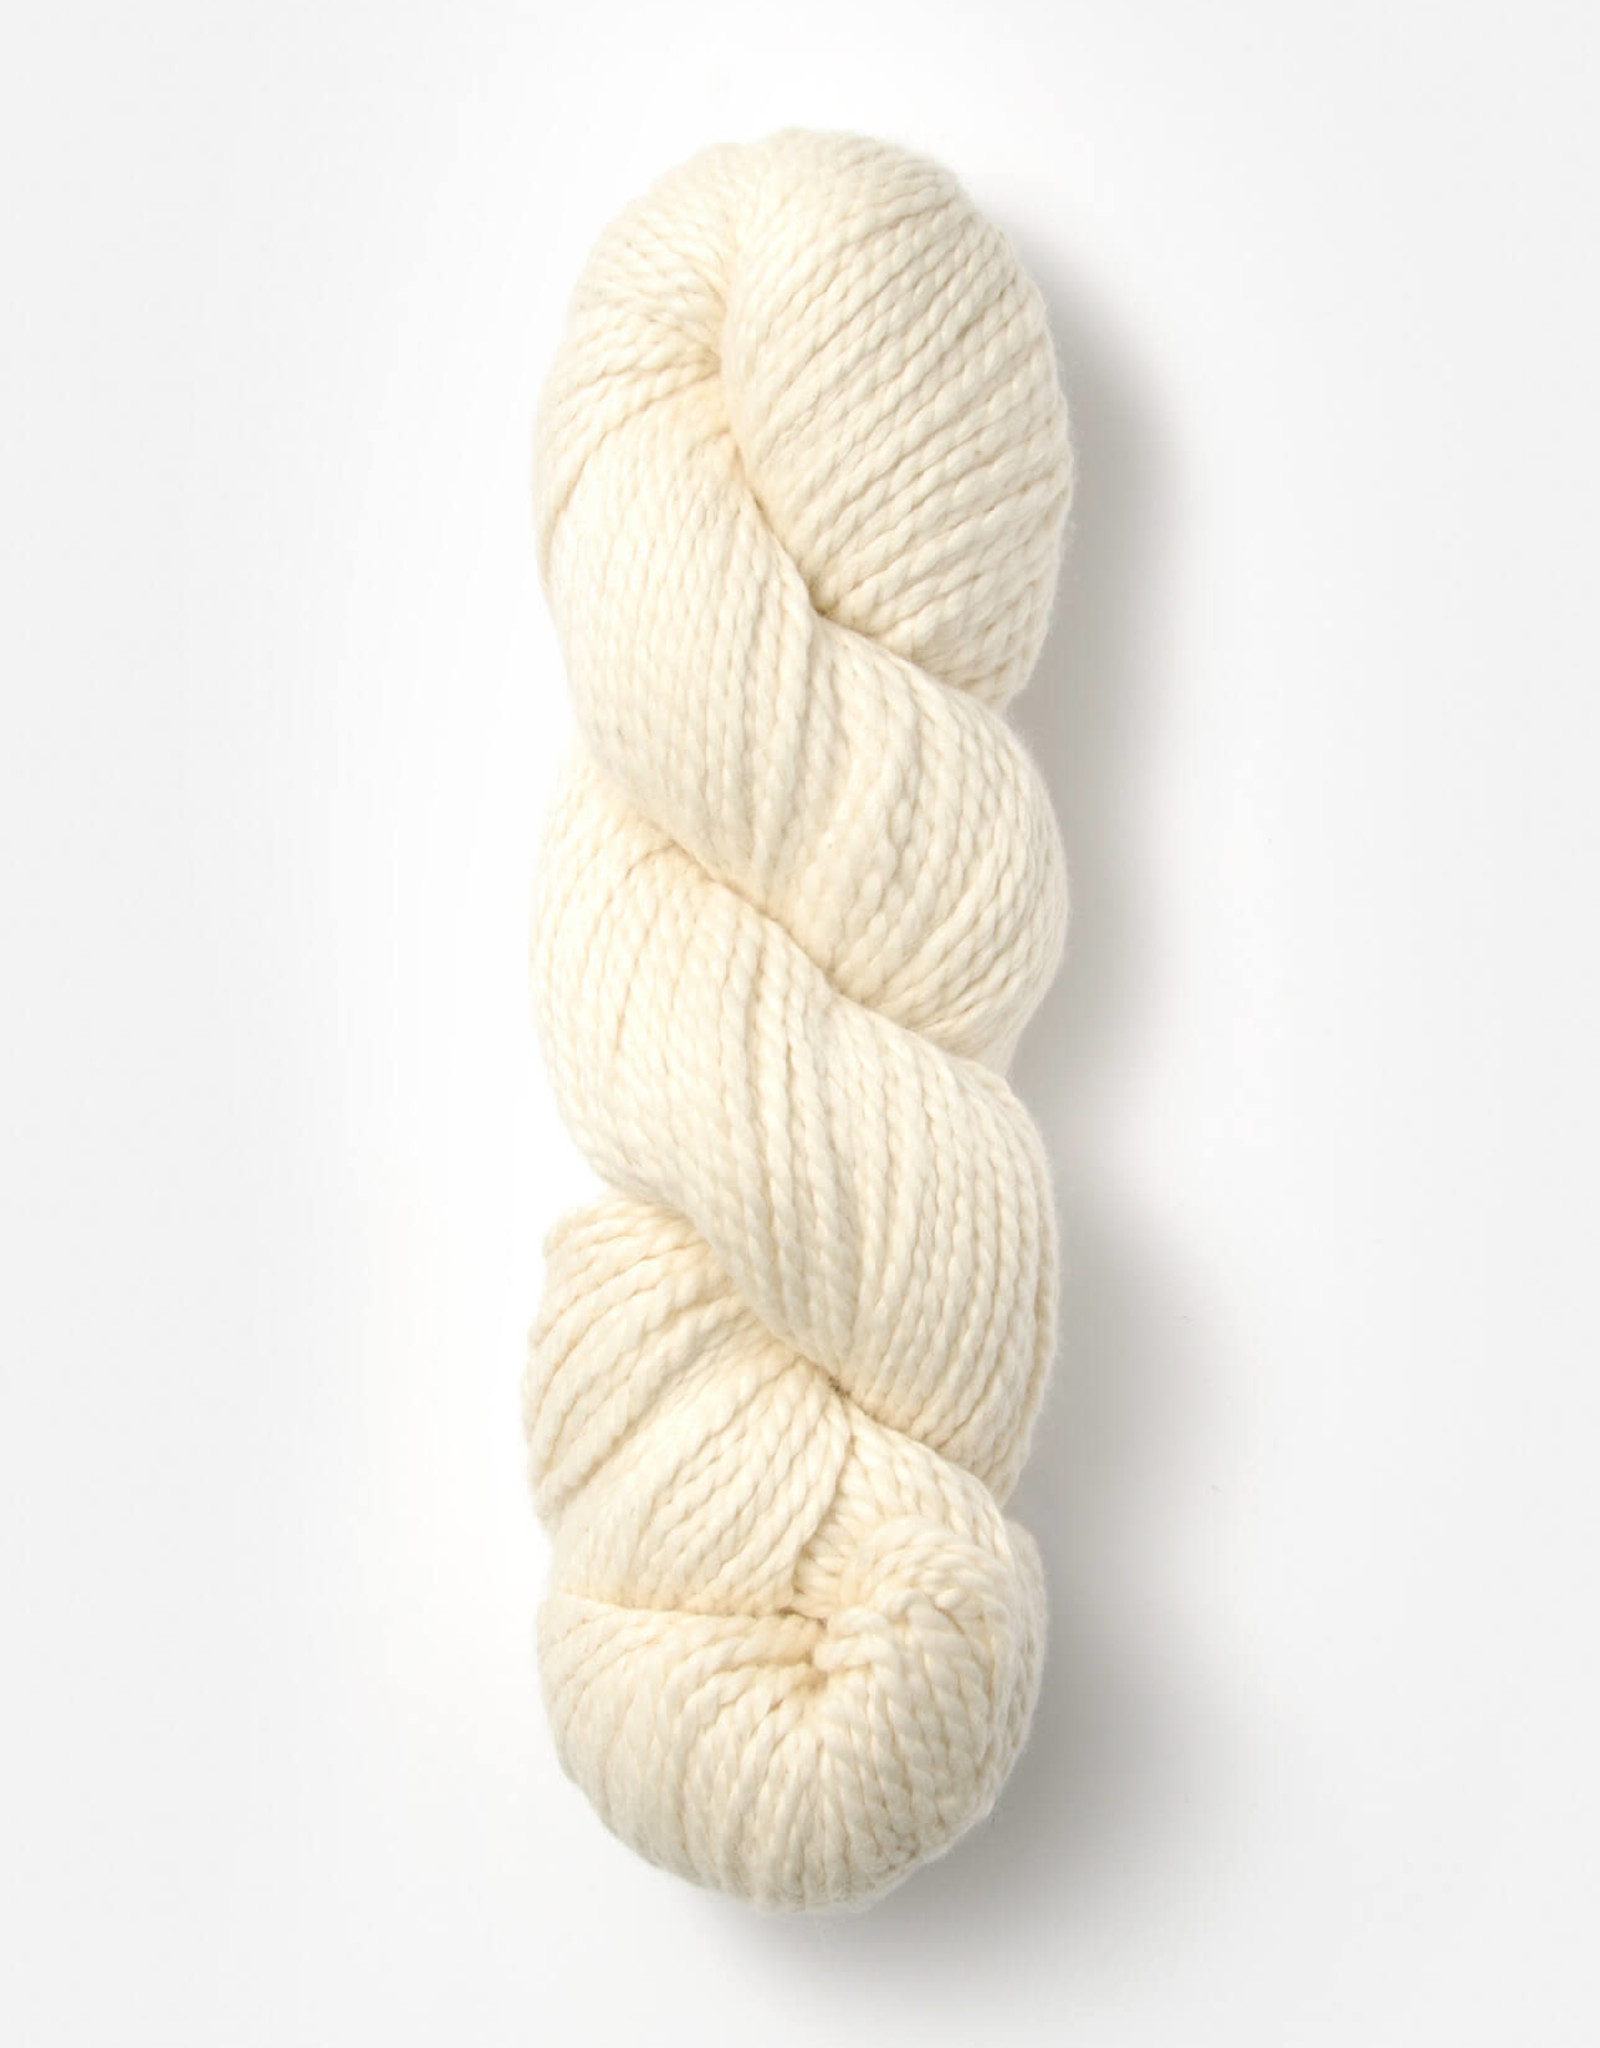 Blue Sky Fibers Organic Cotton Solid - Worsted Weight